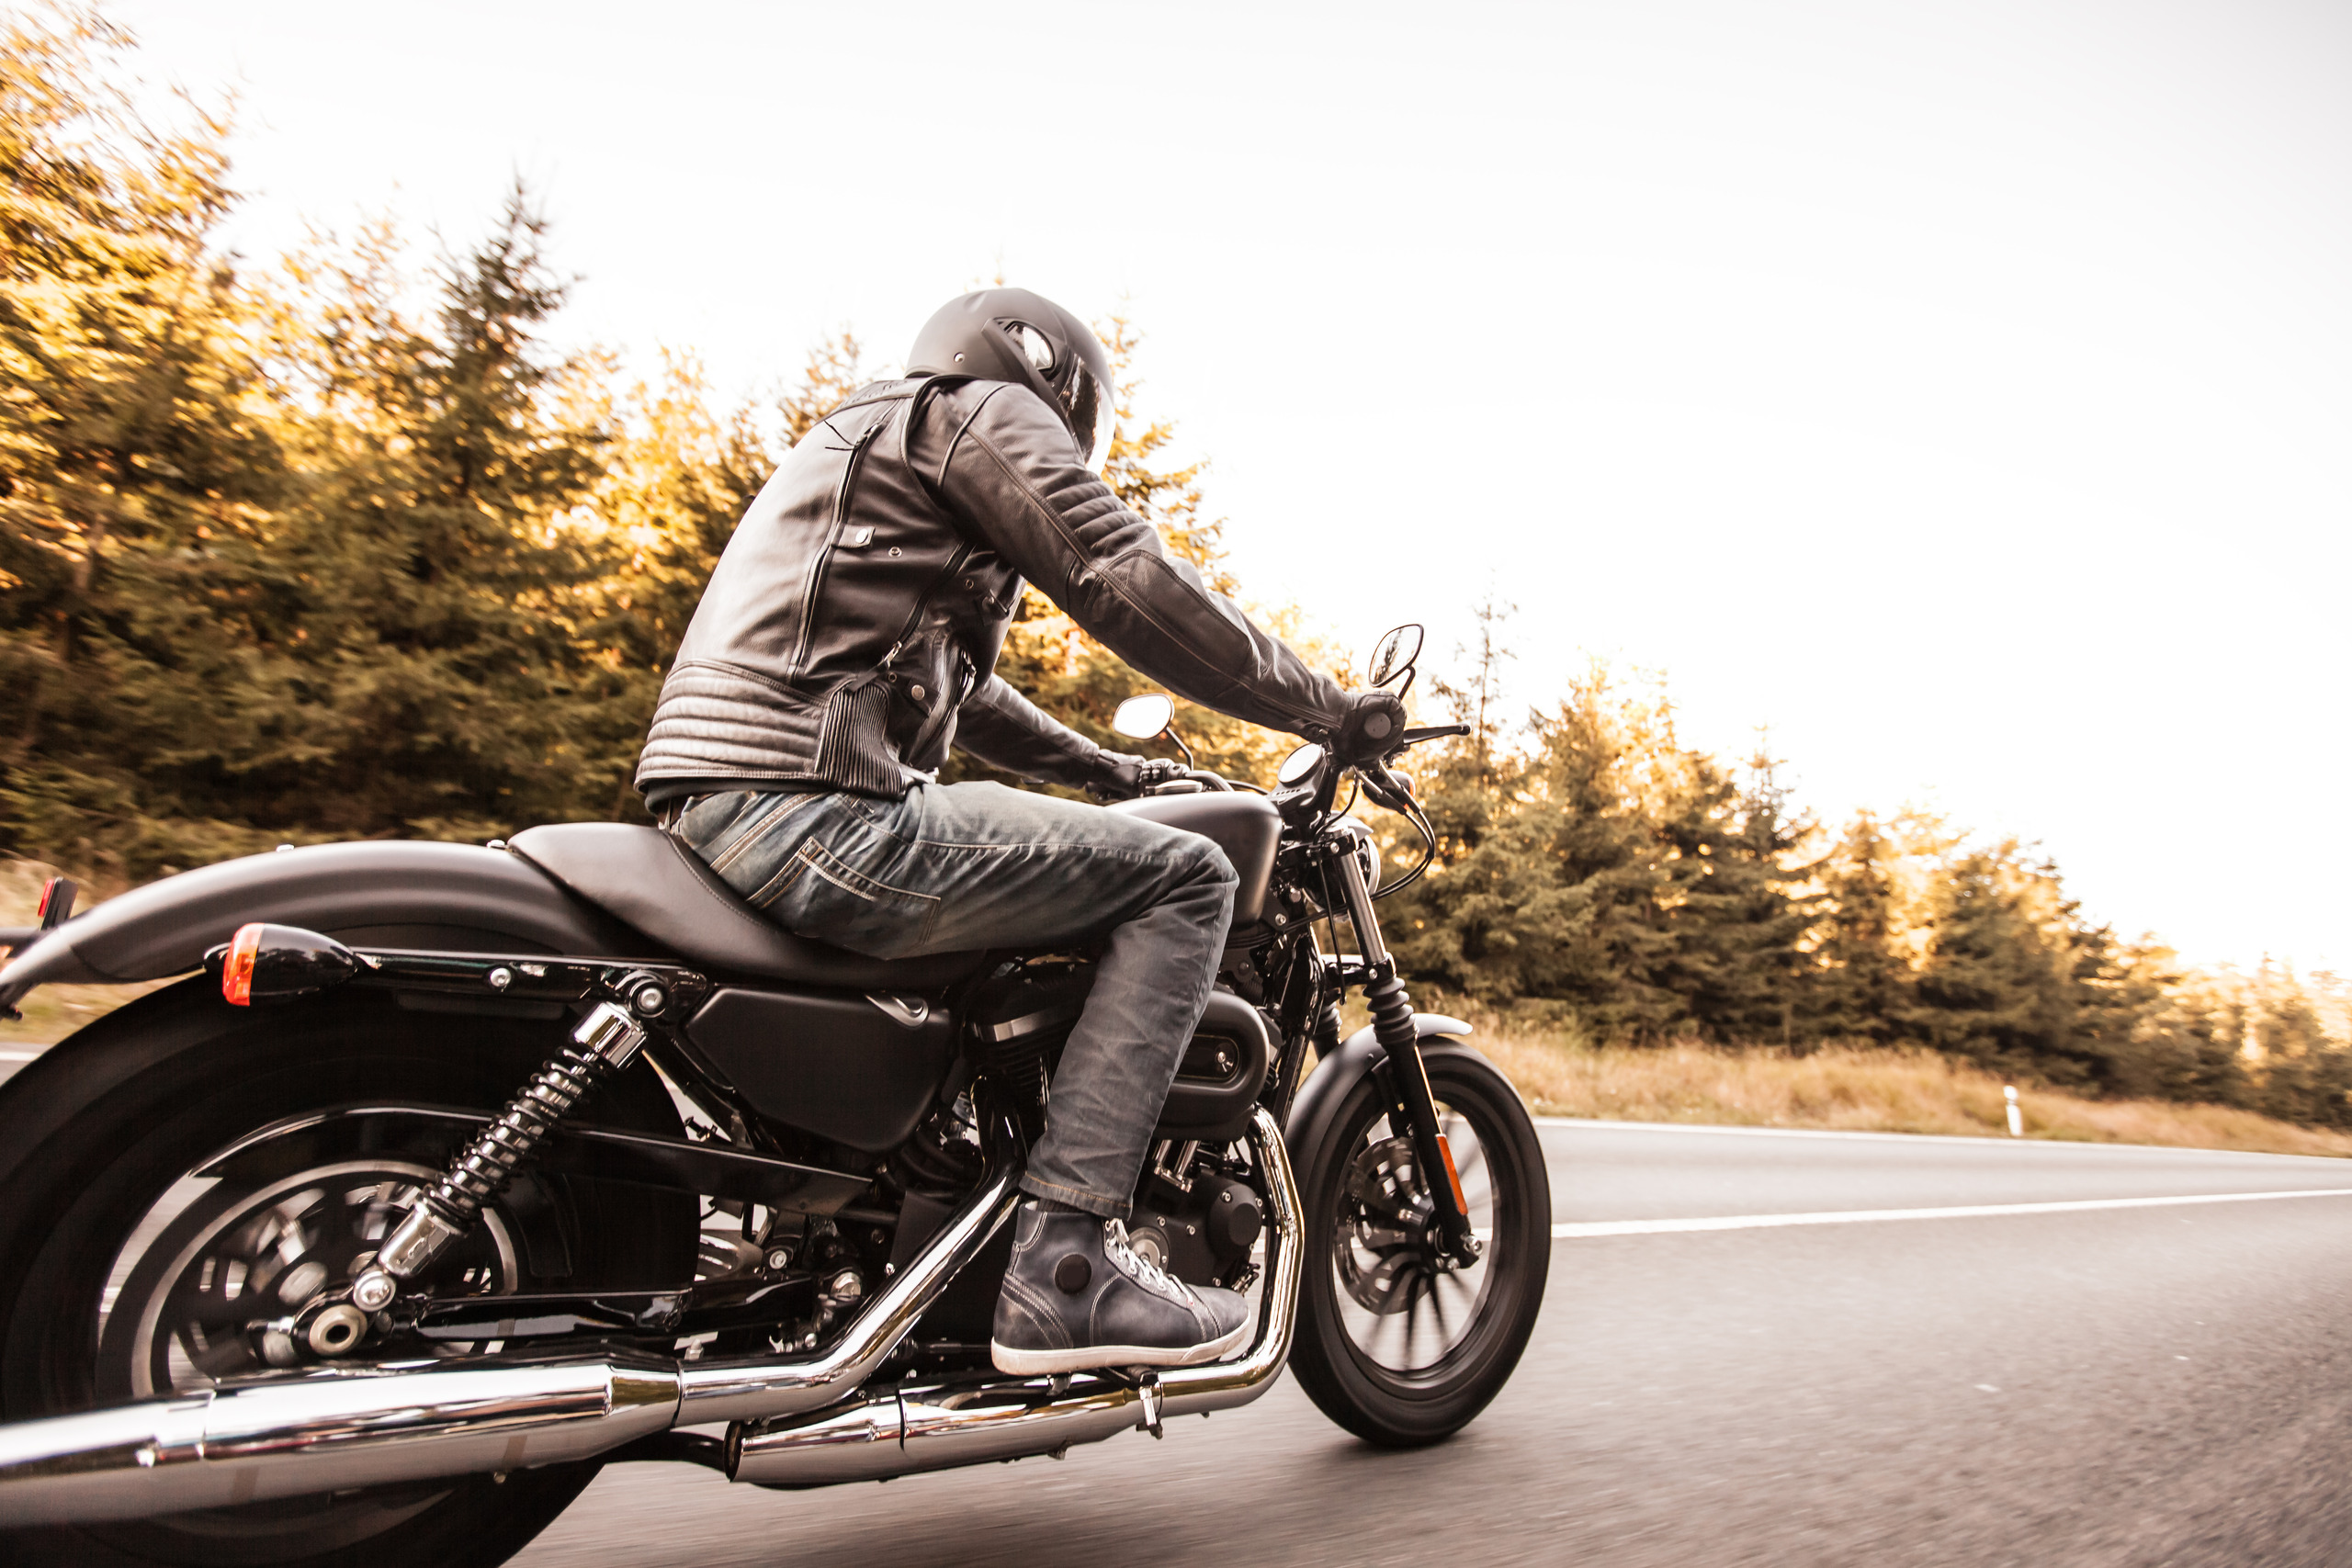 5 Crucial Steps to Take After a Motorcycle Accident in Florida